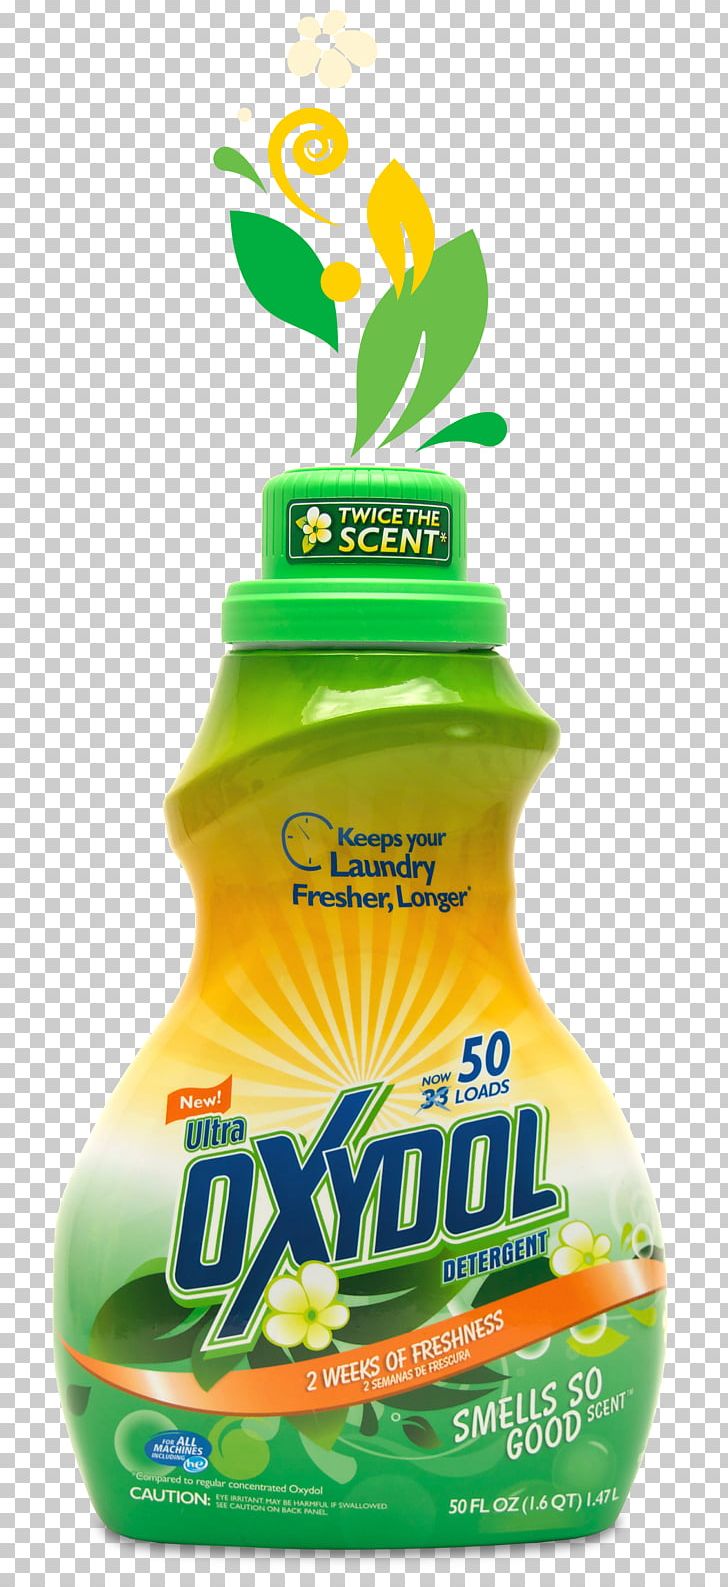 Oxydol Laundry Detergent PNG, Clipart, Concentrate, Freshness, Laundry Detergent, Liquid, Mango Free PNG Download